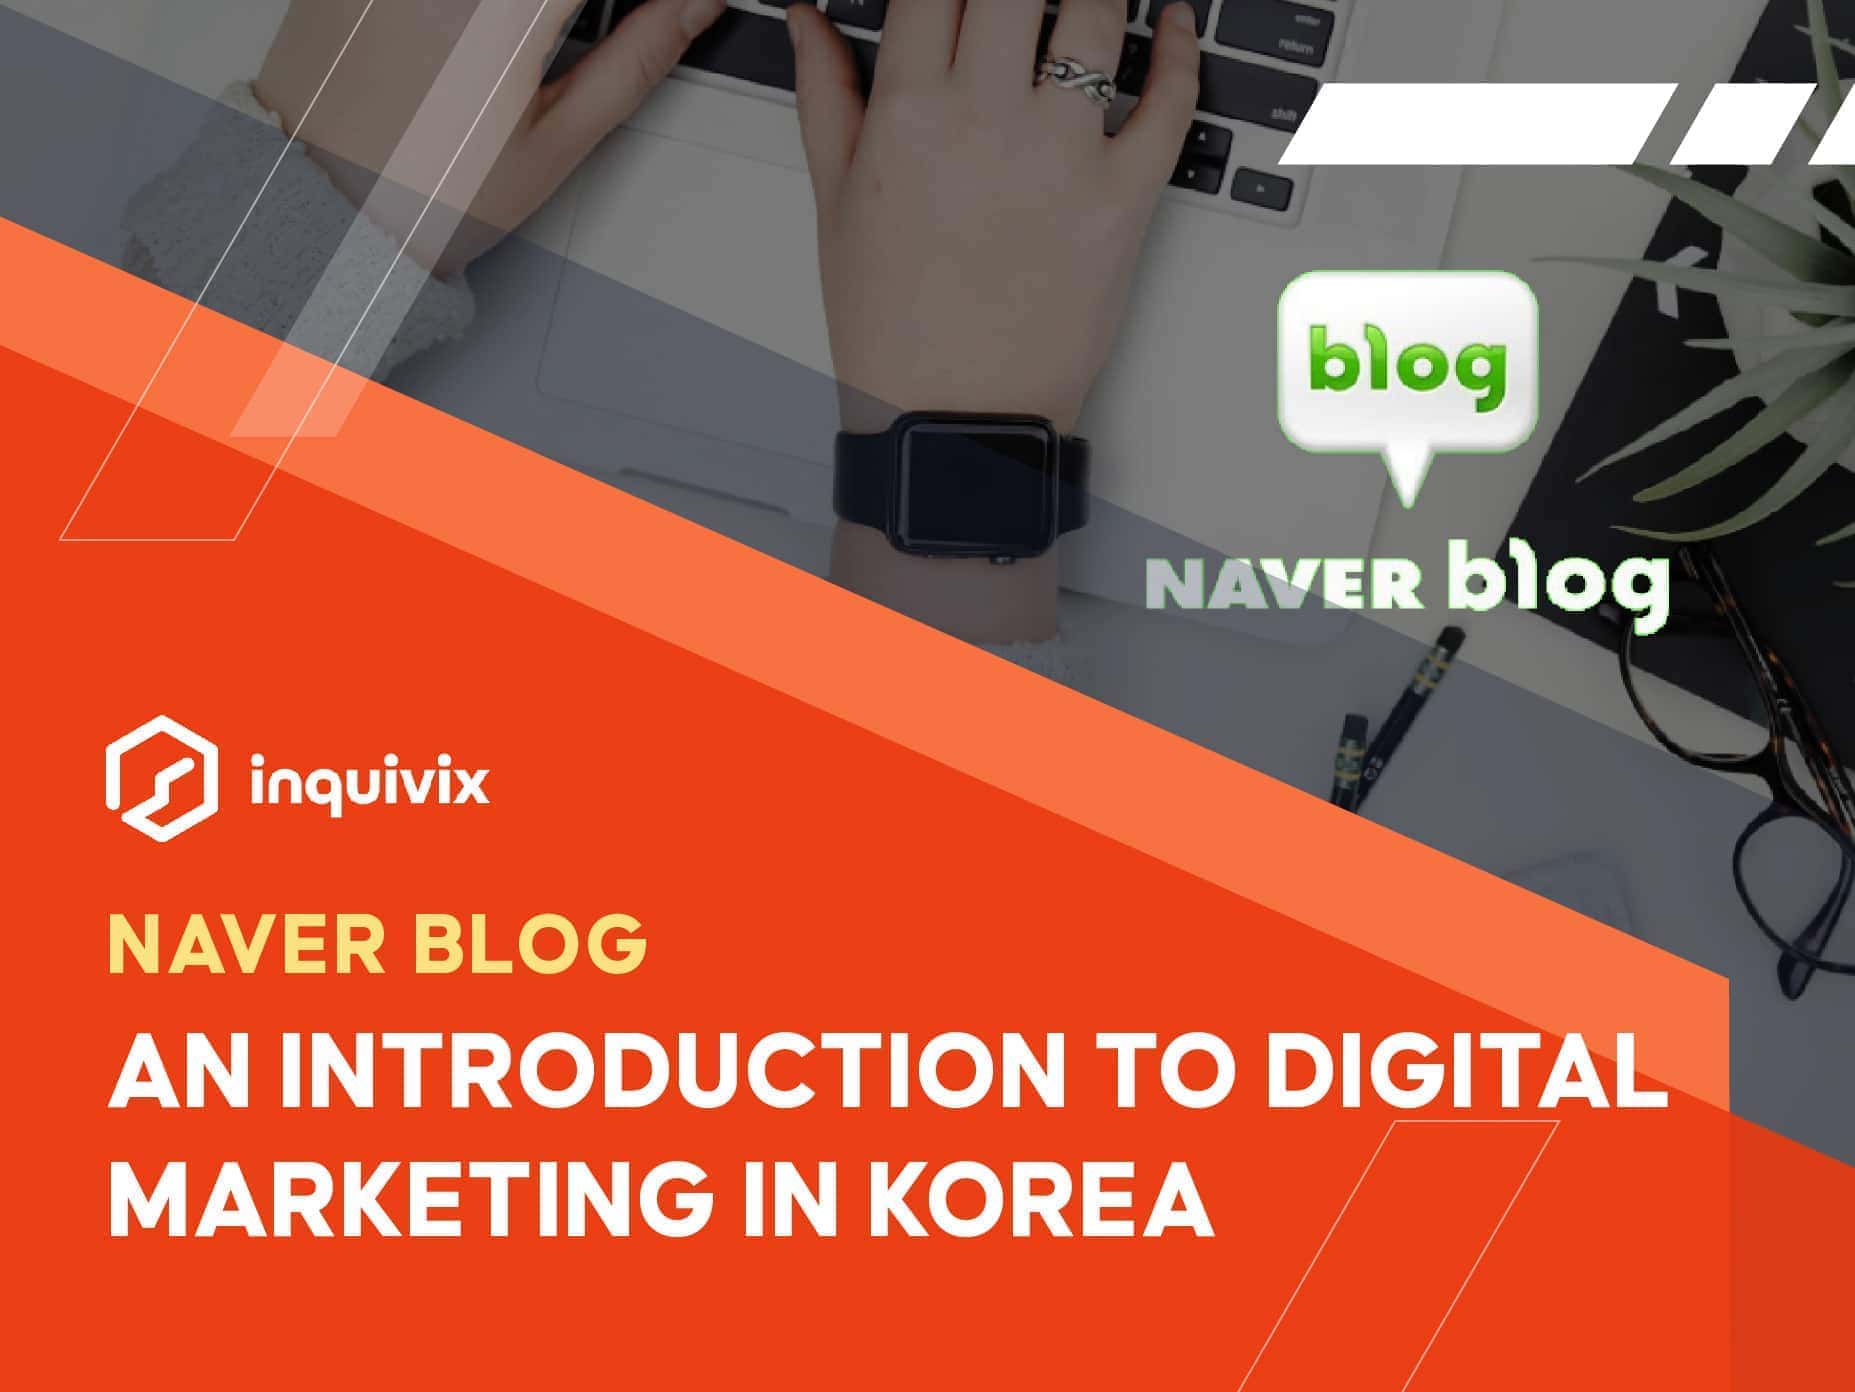 naver blog an introduction to digital marketing in Korea